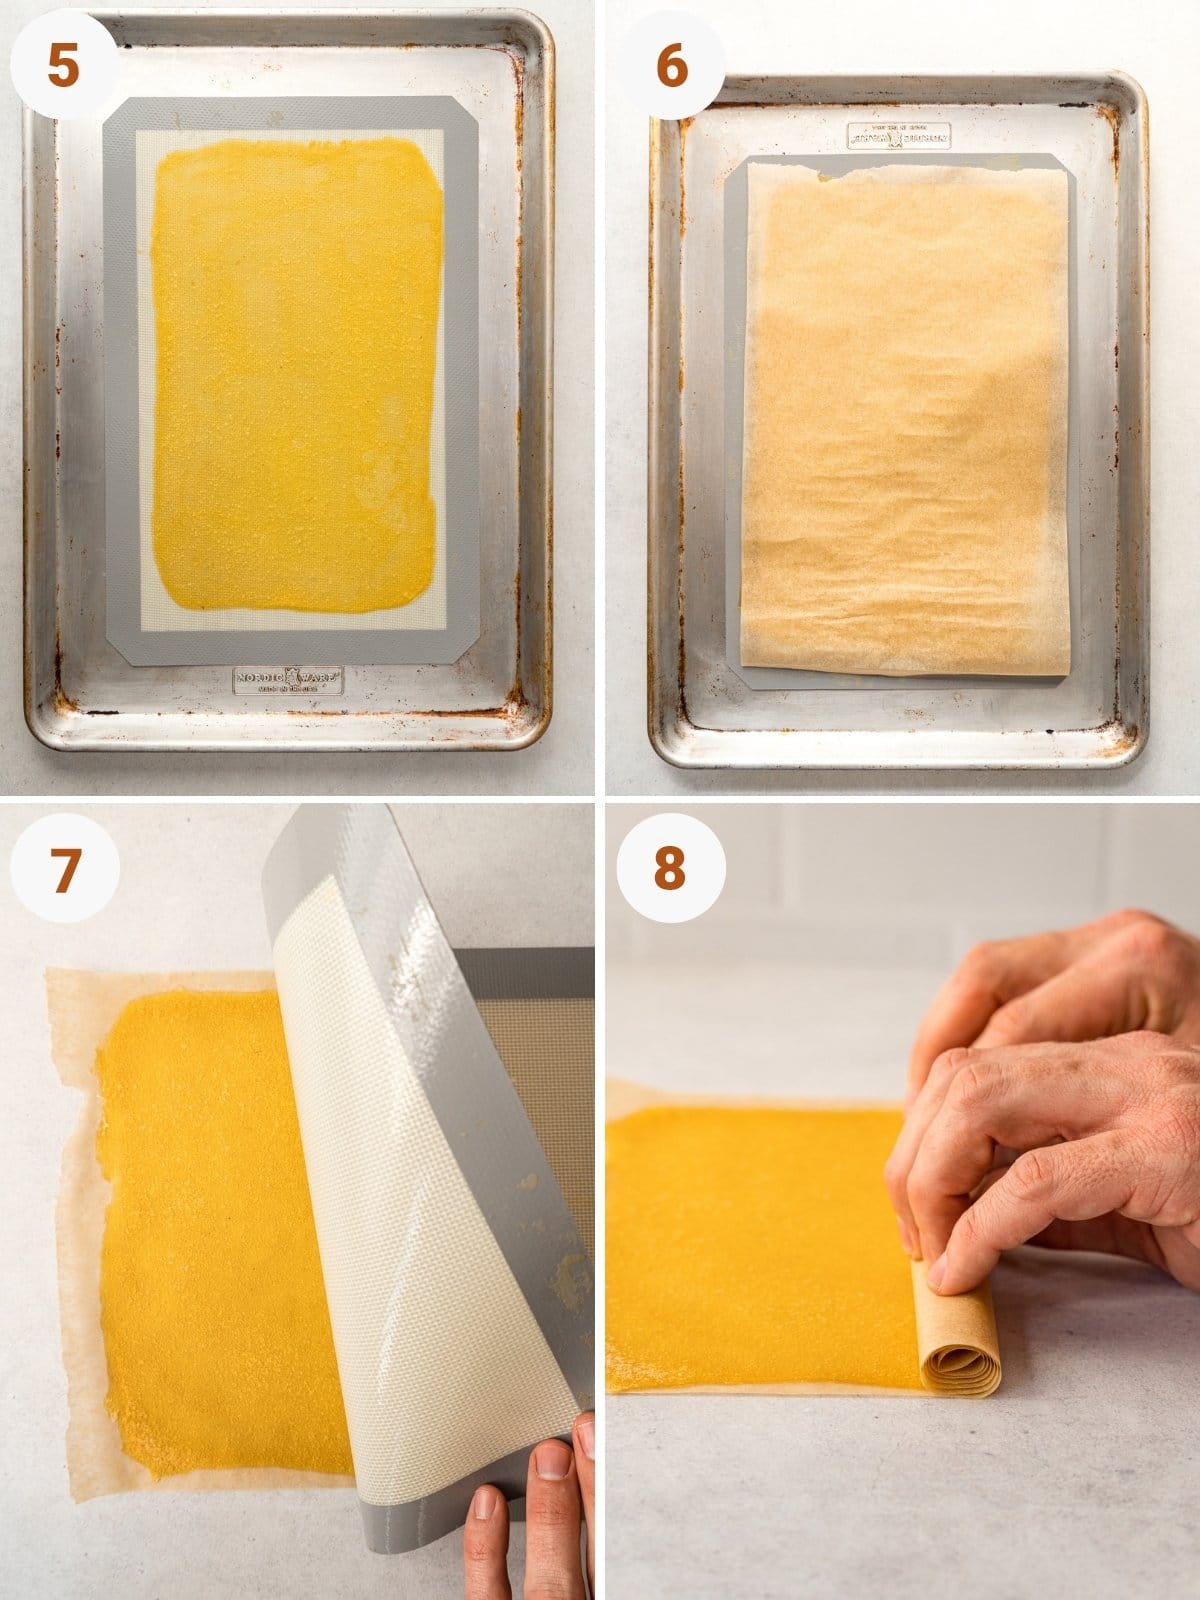 How to make fruit leathers steps 5-8